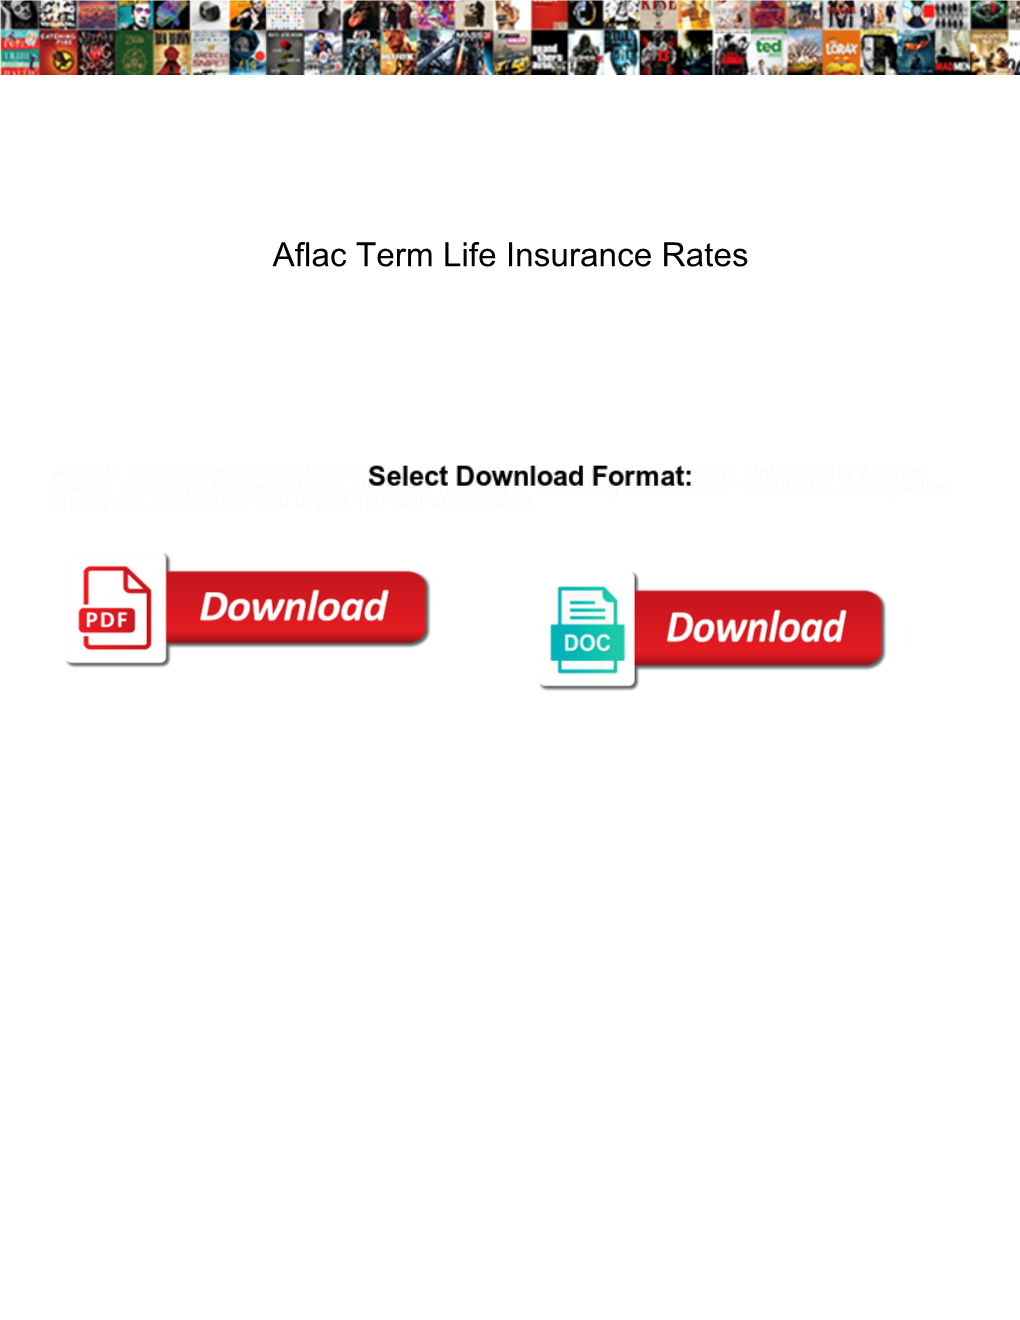 Aflac Term Life Insurance Rates